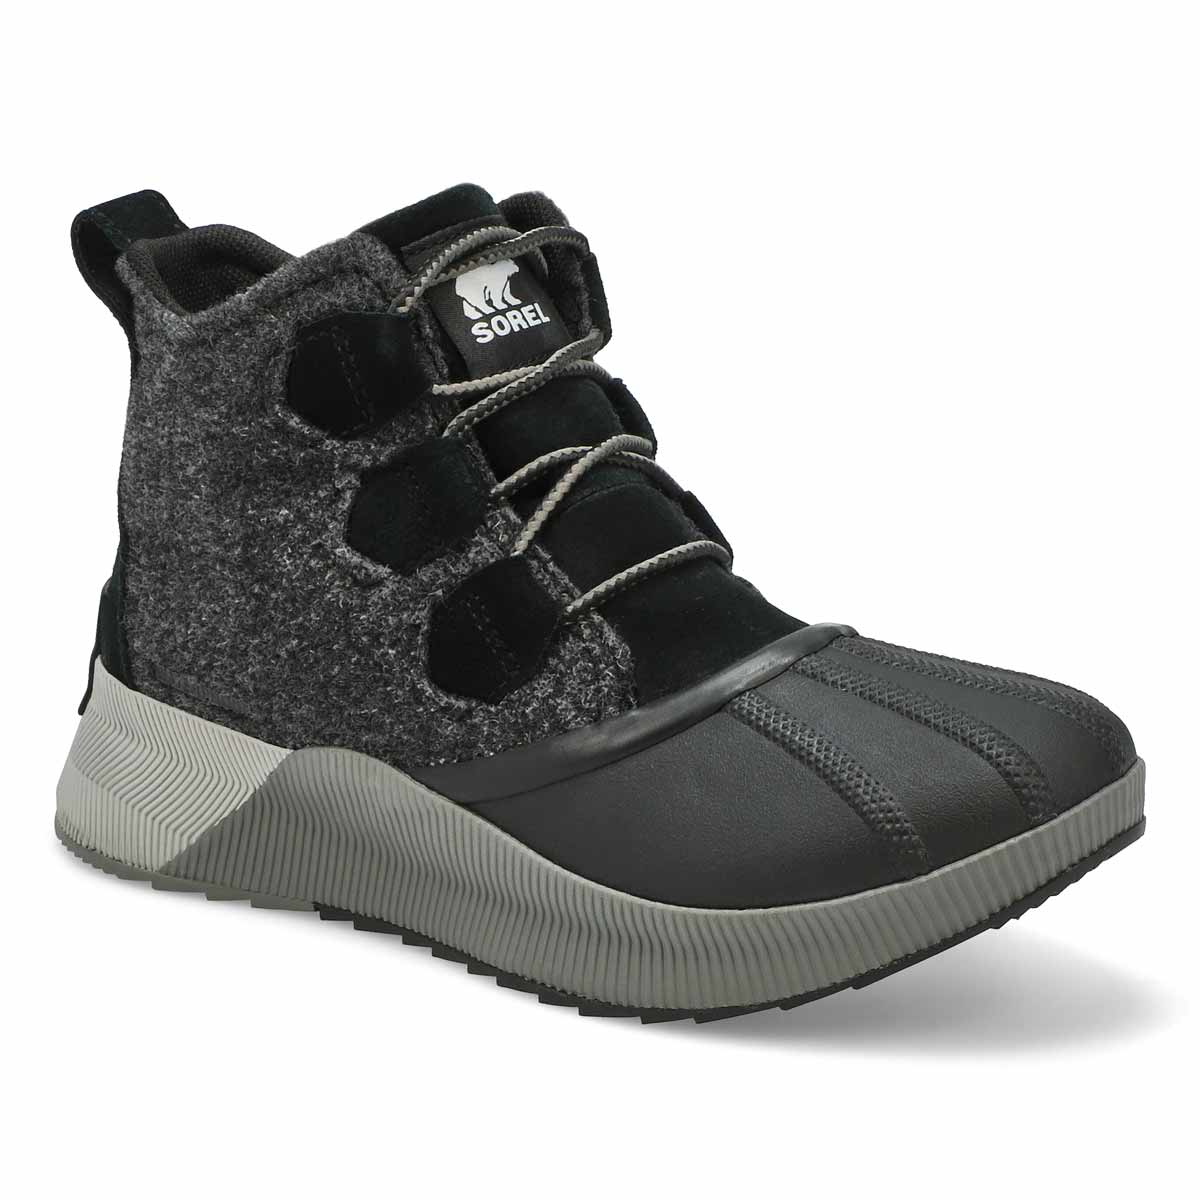 Sorel Women's Out'N About III Waterproof Boot | SoftMoc USA